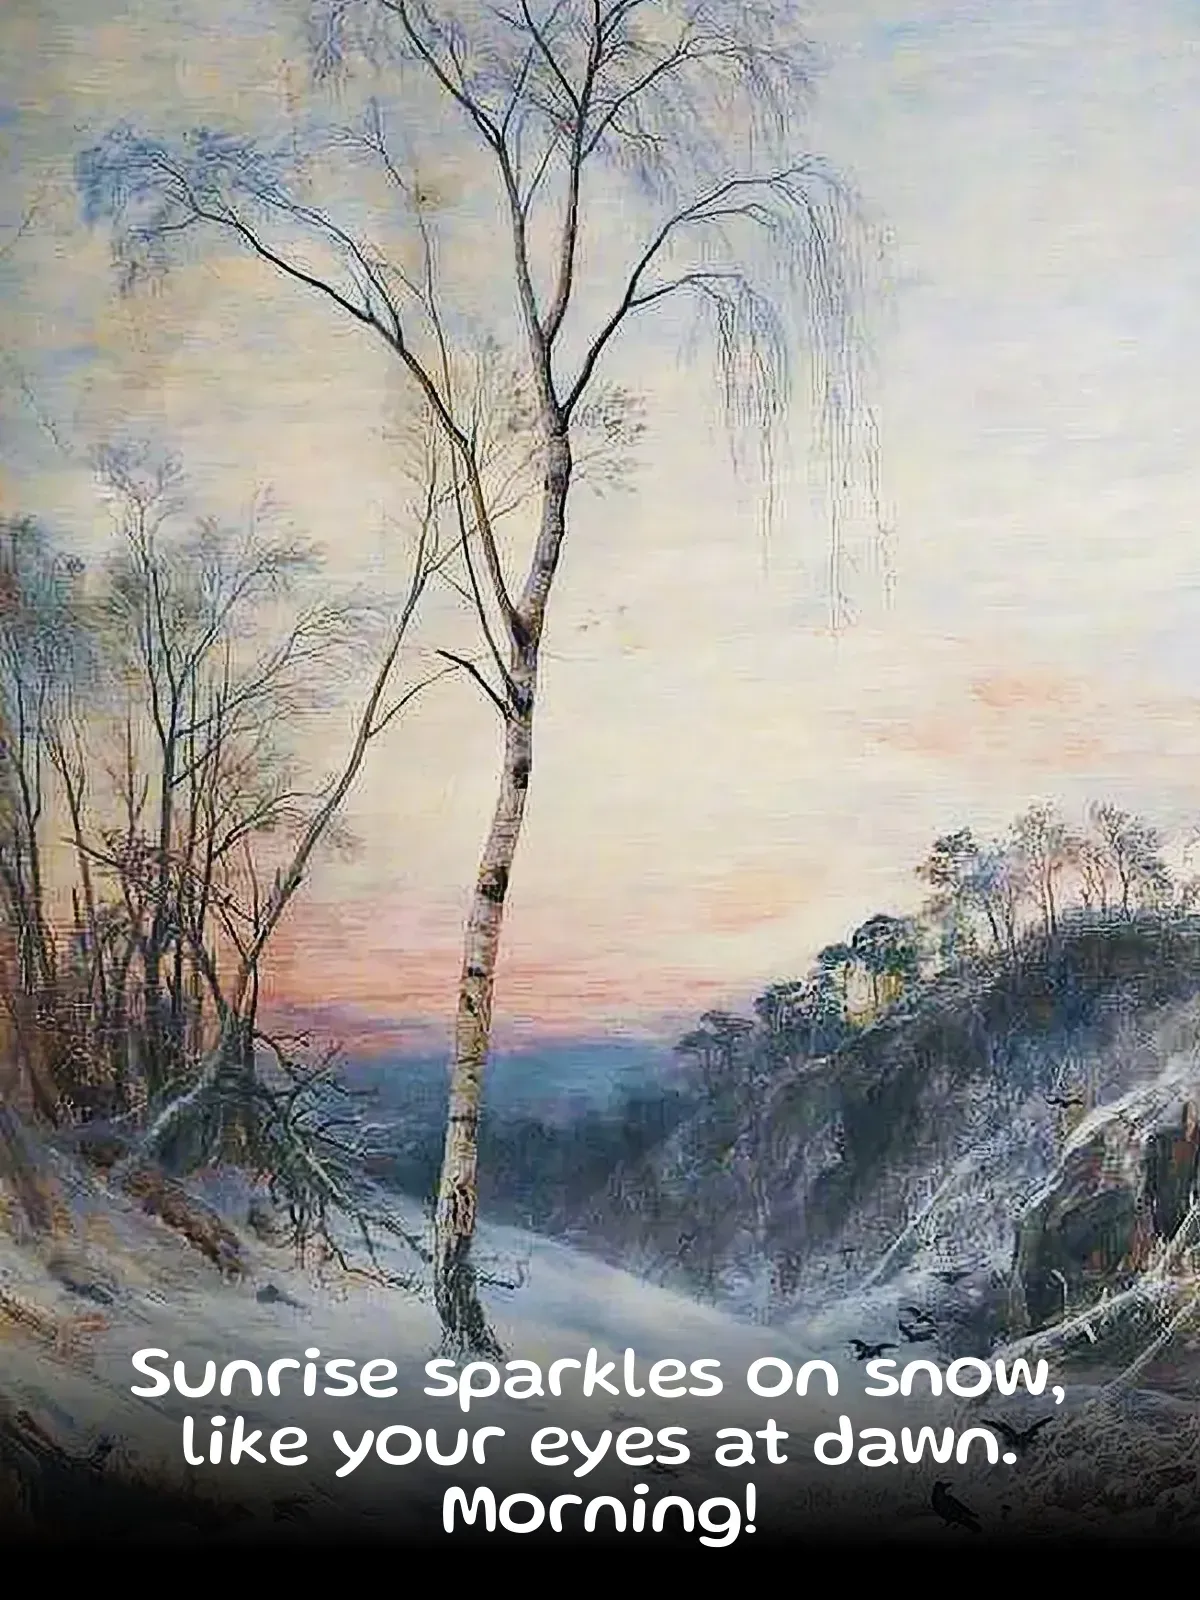 A serene snowy landscape with trees, a sunset, and a figure walking.